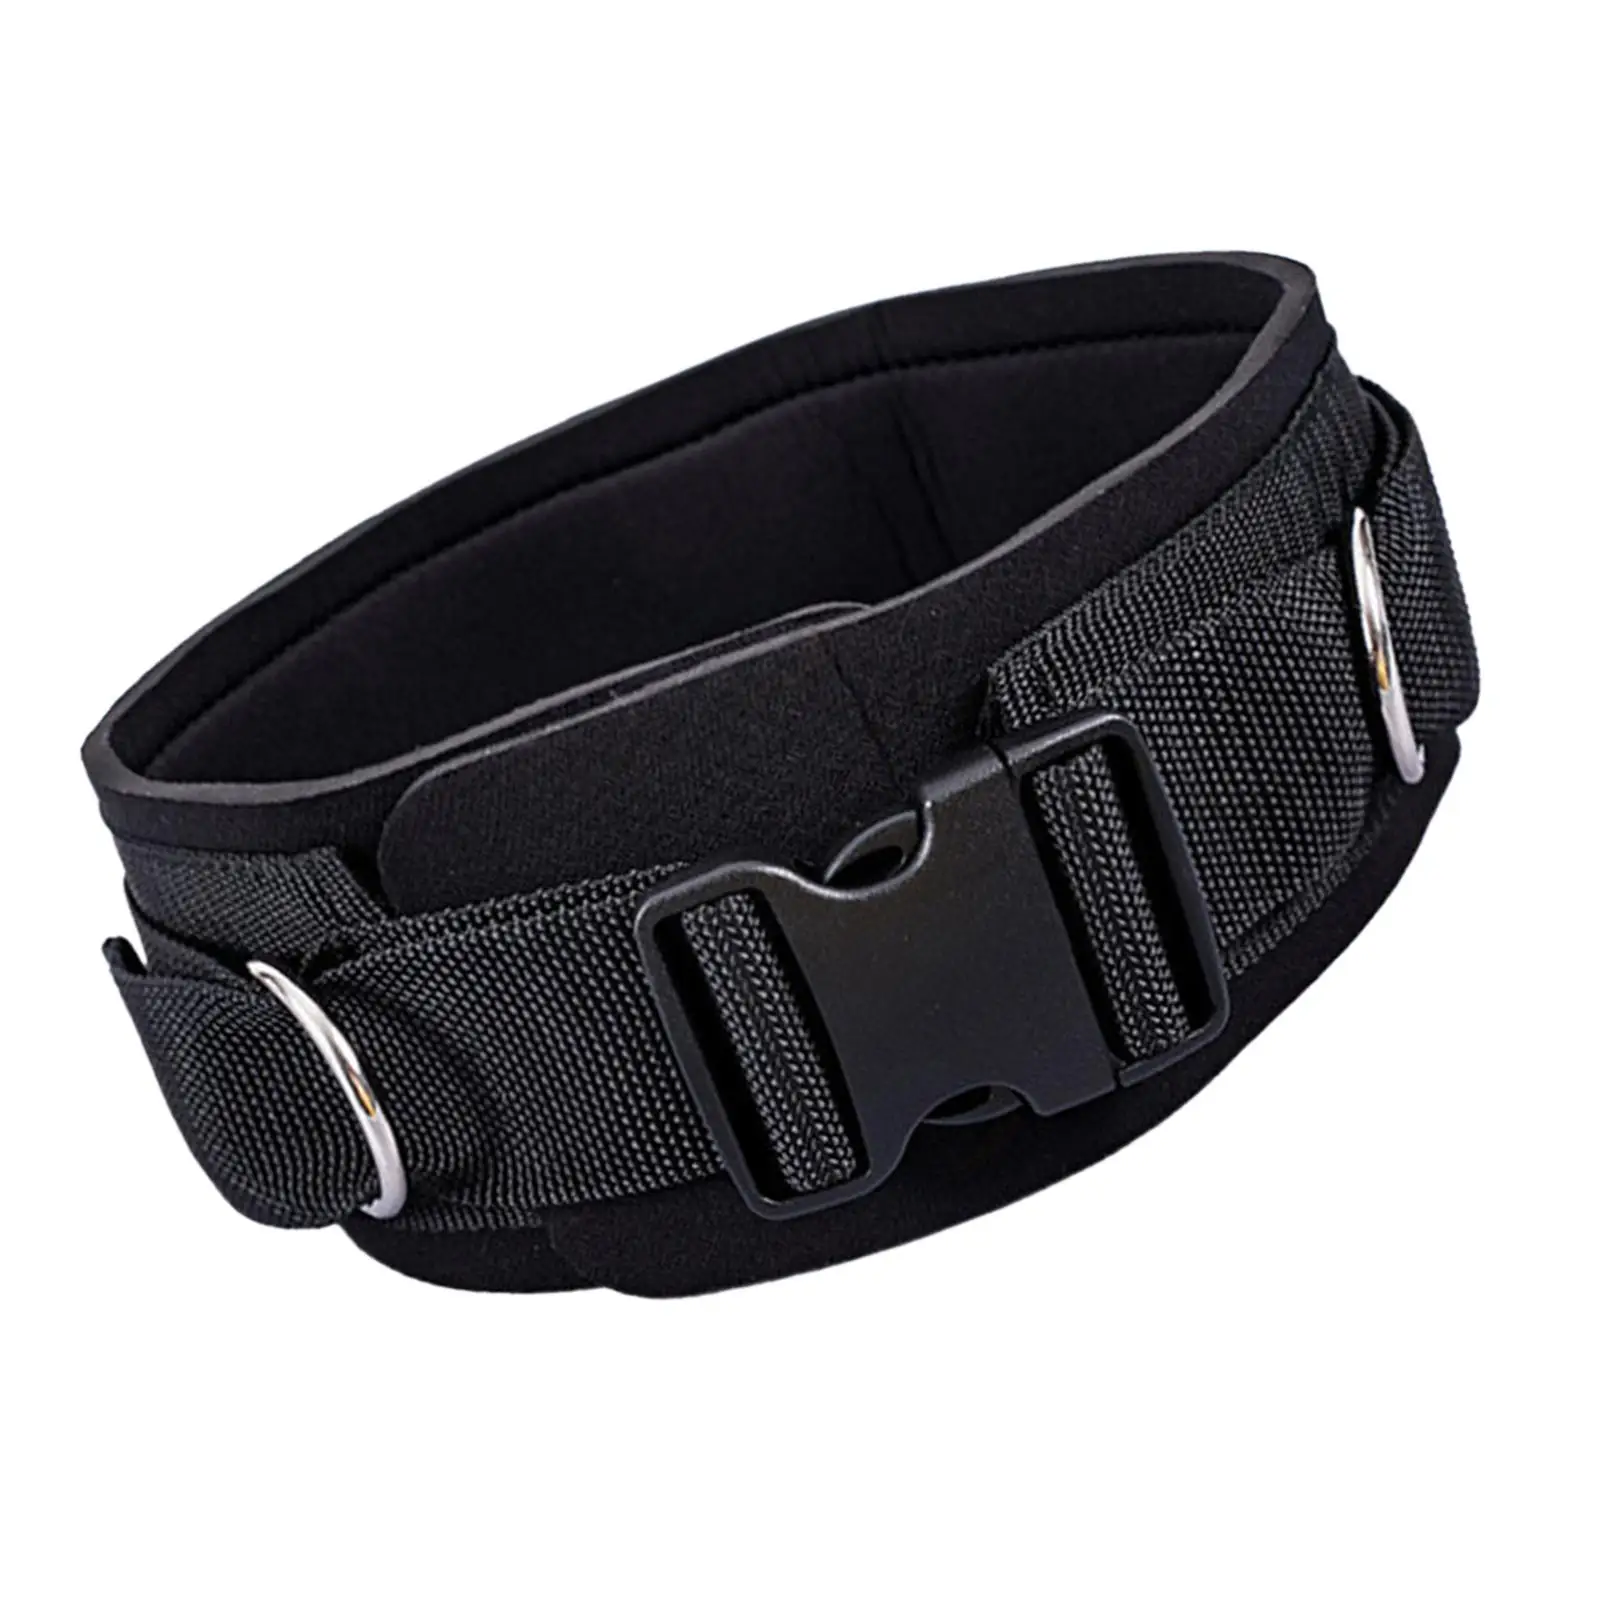 Weight Lifting Belt Quick Release Buckle Body Building Exercise Waist Support